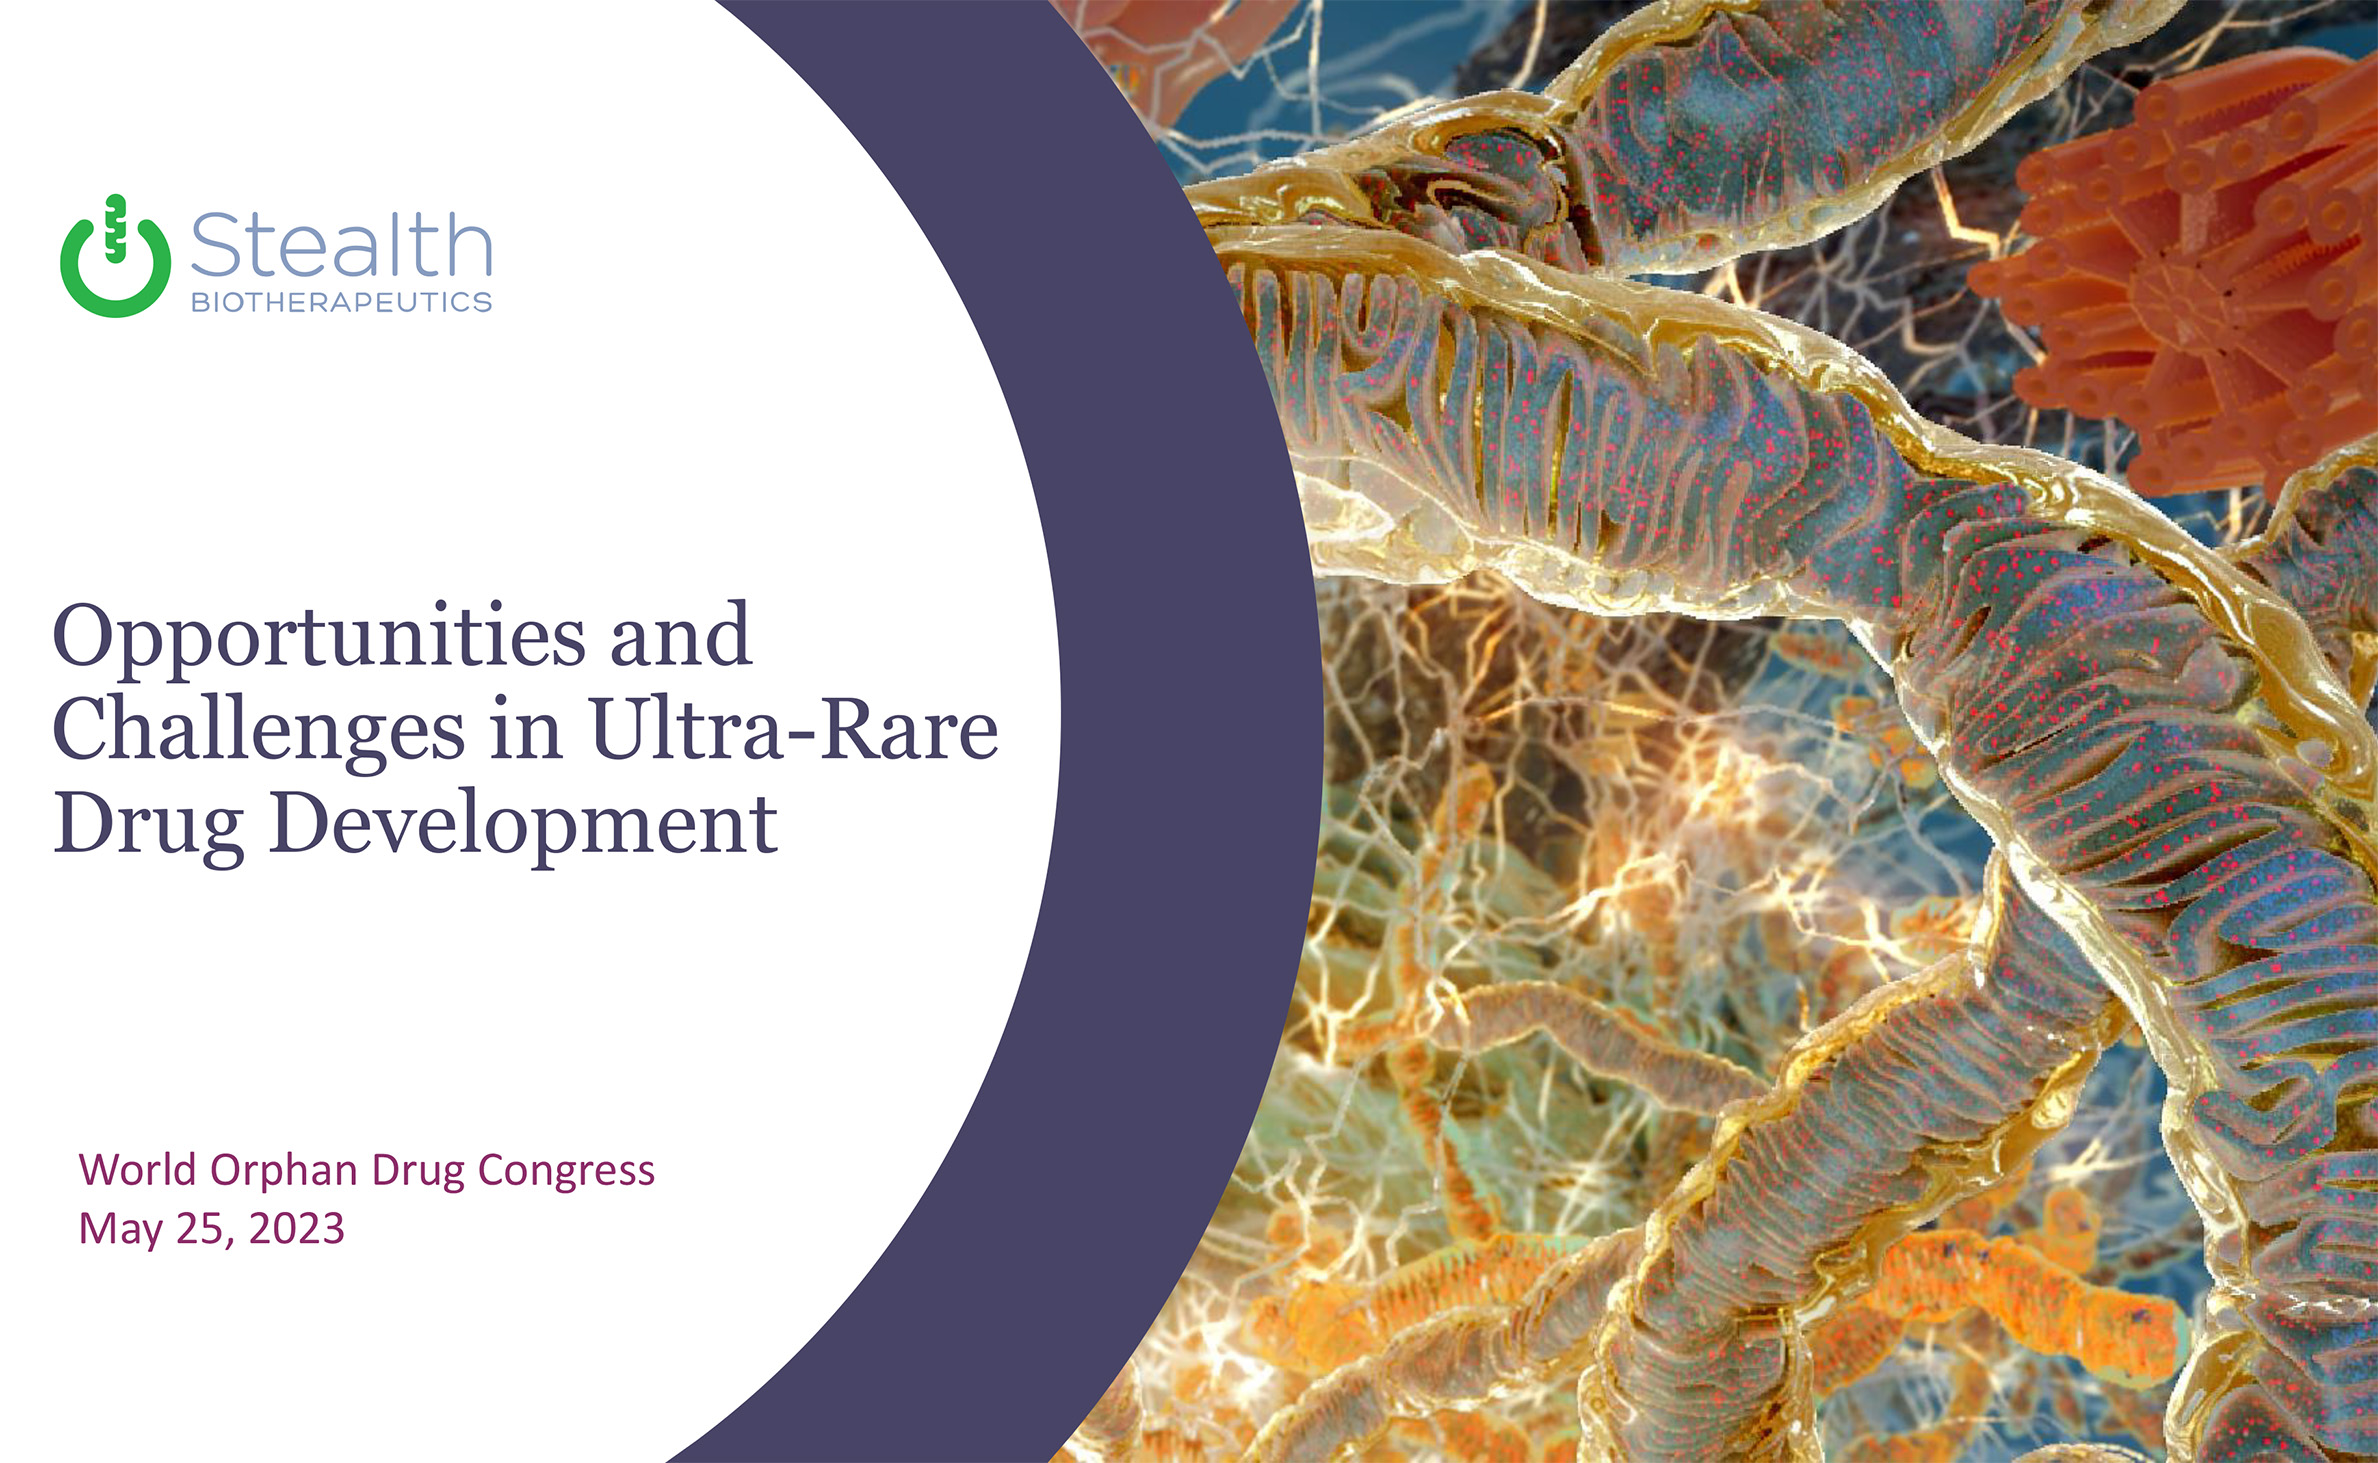 "Opportunities and Challenges in Ultra-Rare Drug Development,” presented by Reenie McCarthy at the 2023 World Orphan Drug Congress in Washington DC. In this presentation, she discusses the company's Barth syndrome development program as a case study to highlight the need for new incentives and differentiated ultra-rare regulatory pathways to reduce health inequities faced by patients with ultra-rare diseases